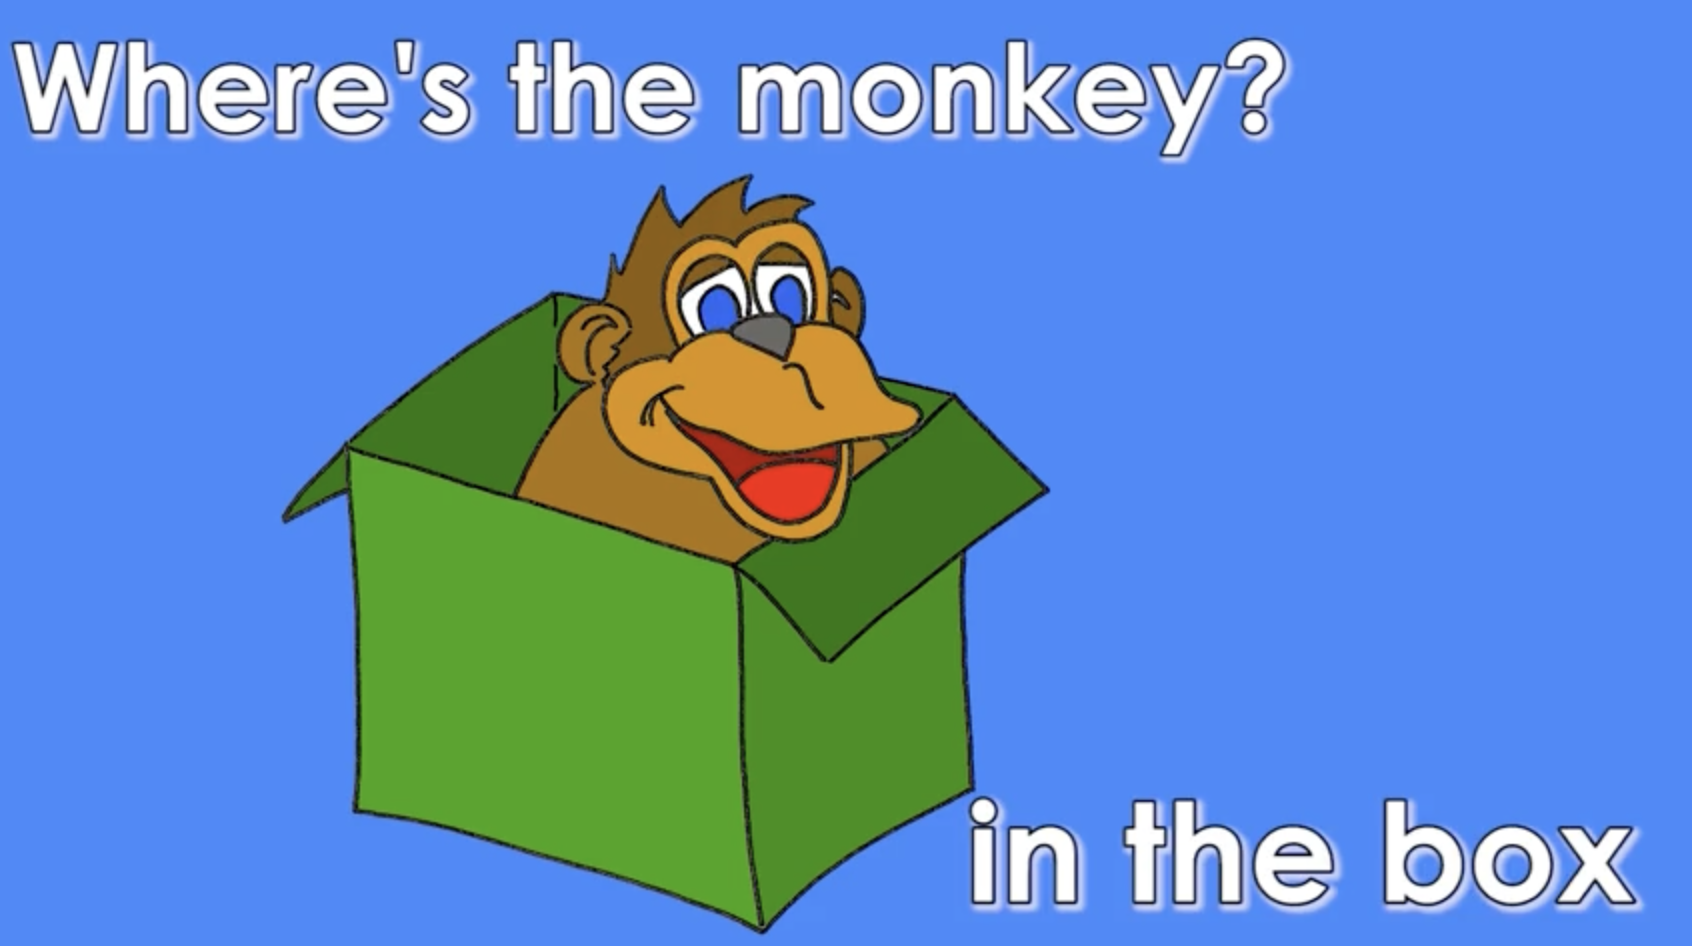 Where's the monkey? In the box